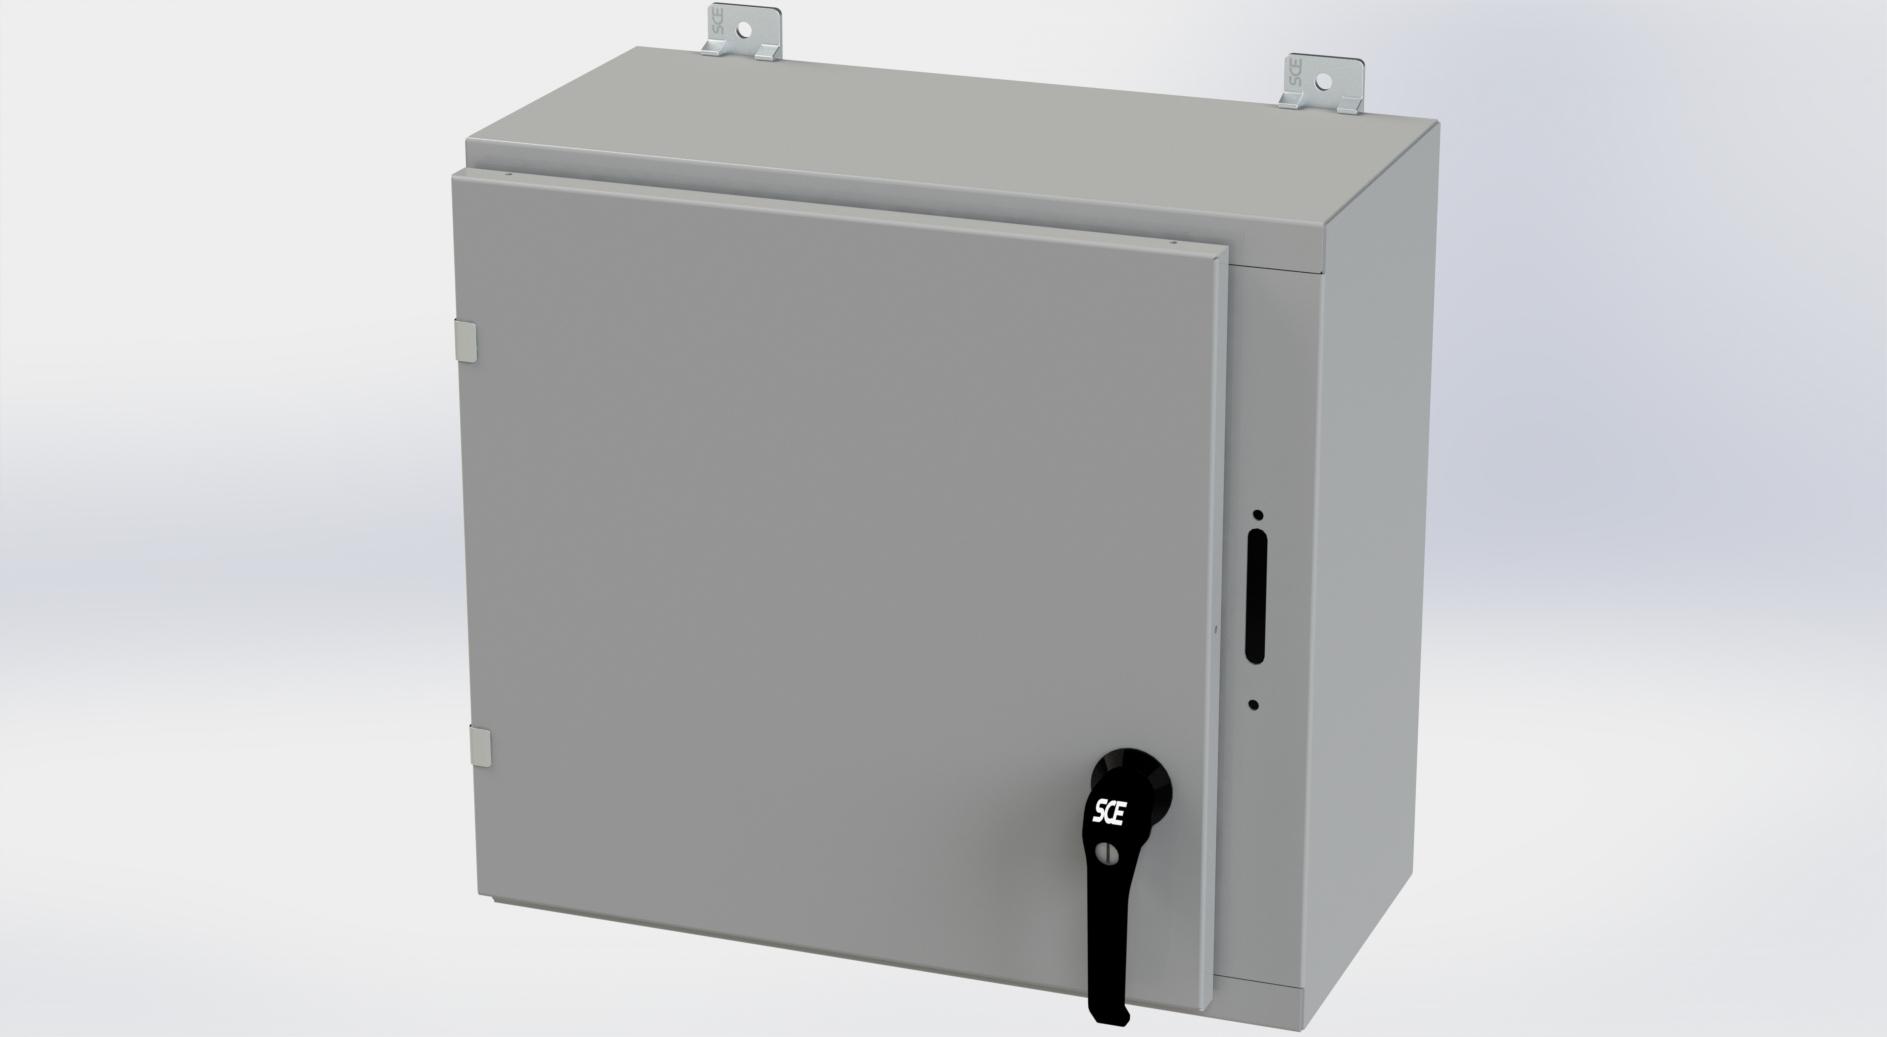 Saginaw Control SCE-20SA2210LPPL Obselete Use SCE-20XEL2110LP, Height:20.00", Width:21.38", Depth:10.00", ANSI-61 gray powder coating inside and out. Optional sub-panels are powder coated white.